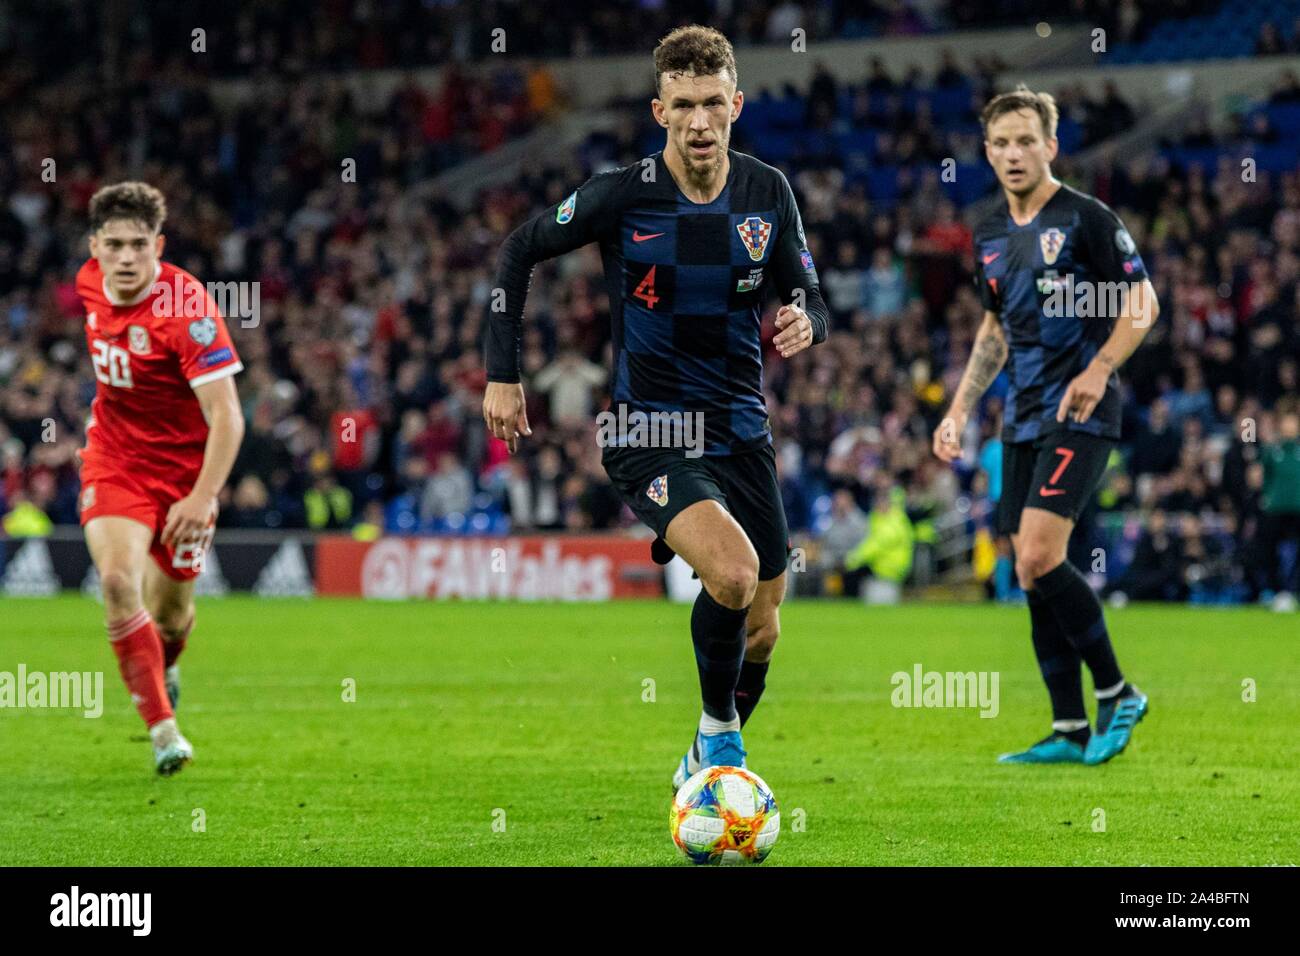 Cardiff, Wales, UK. 13th Oct 2019. Ivan Perisic of Croatia in action against Wales. Wales v Croatia UEFA Euro 2020 Qualifier at the Cardiff City Stadium. Lewis Mitchell/YCPD/Alamy Live News. Stock Photo